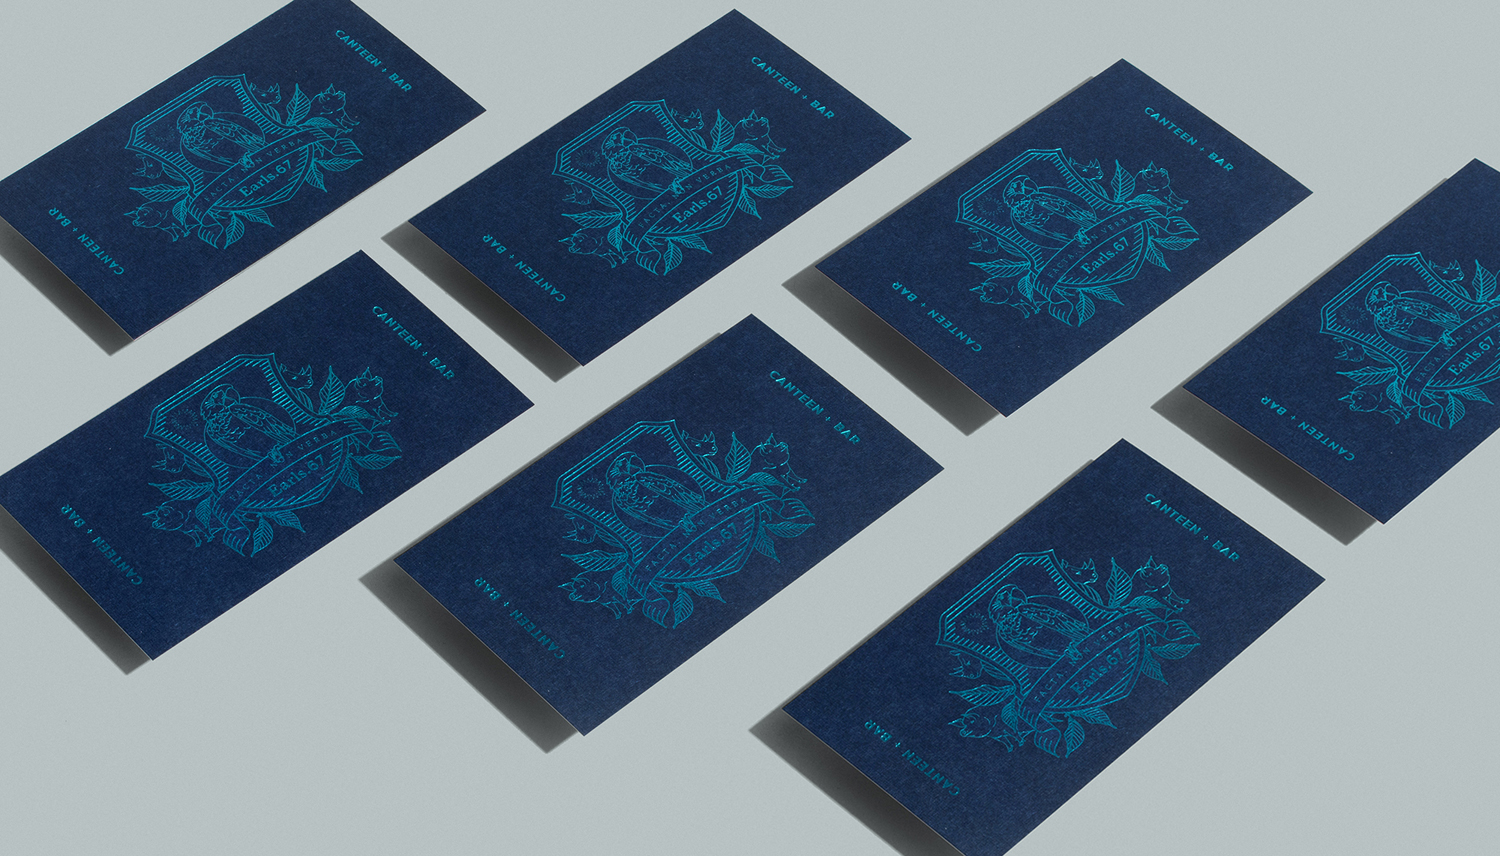 Brand identity and business cards with blue block foil print finish by Glasfurd & Walker for US and Canadian restaurant chain prototype Earls.67